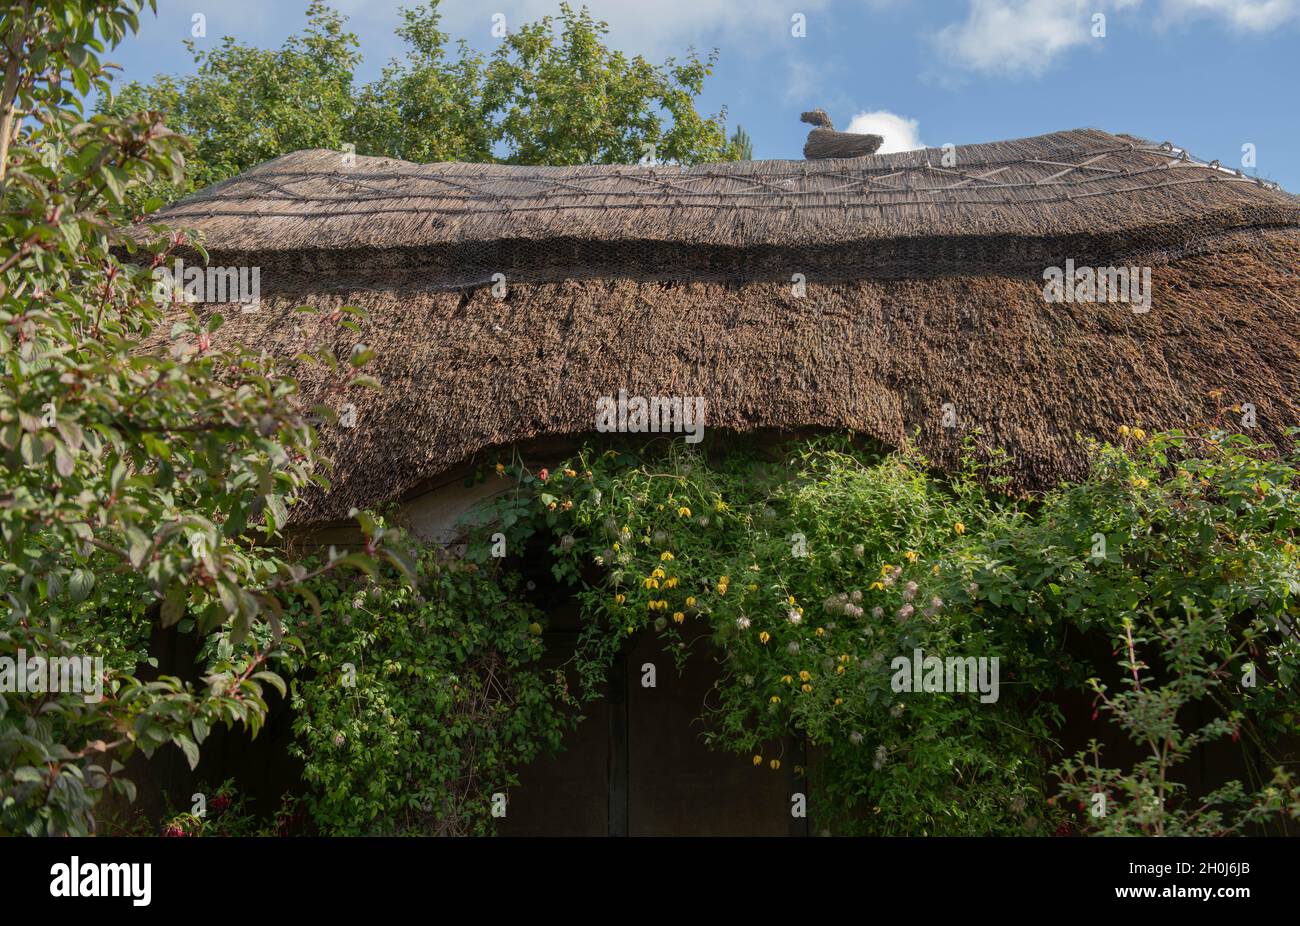 Traditional English Thatched Roof on a Summerhouse in a Country Cottage Garden with a Bright Blue Sky Background in Rural Devon, England, UK Stock Photo